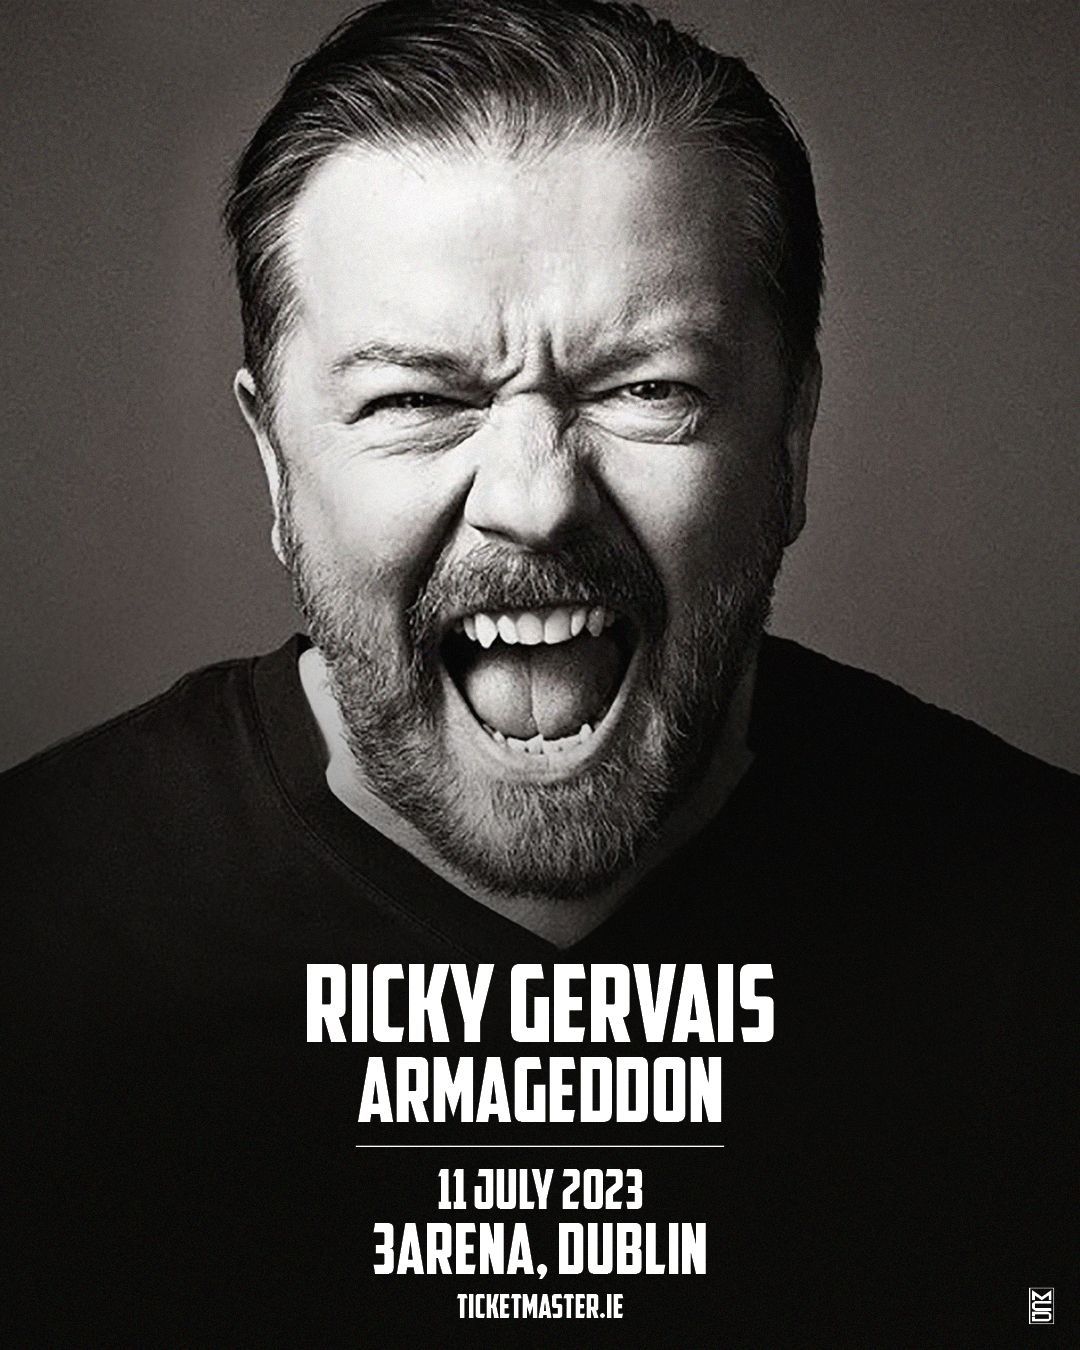 RICKY GERVAIS: ARMAGEDDON FURTHER 2023 DATES ADDED   BRITAIN’S BIGGEST INTERNATIONAL COMEDIAN RICKY GERVAIS ANNOUNCES HUGE NEW 2023 ‘ARMAGEDDON’ WORLD TOUR DATES   New arena shows announced across Ireland, UK, Europe, US & Canada throughout 2023    Massive OVO Arena Wembley date announced alongside four shows at the prestigious London Palladium    Gervais set to play one of his biggest ever stand-up gigs at LA’s Hollywood Bowl    Armageddon:  All New Dates Go On Sale –  Friday 31st March, 10am